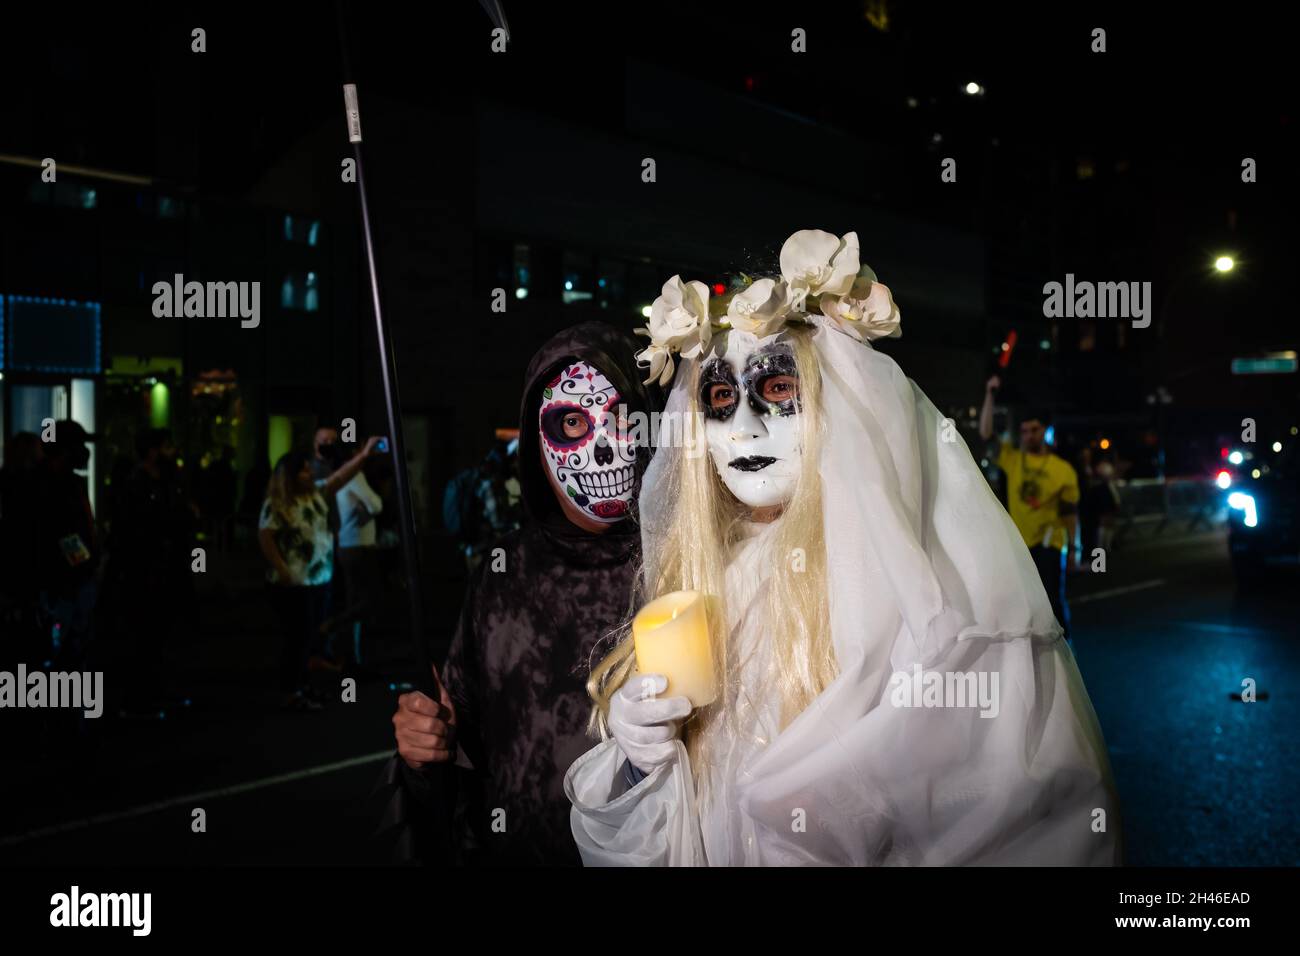 New York City, USA. 31st Oct, 2021. The annual Greenwich Village Halloween parade returned in 2021after a year's suspension because of COVID restrictions. A man wears Mexican-styled death-head makeup, and a woman dresses as a corpse bride and carries a candle. Credit: Ed Lefkowicz/Alamy Live News Stock Photo